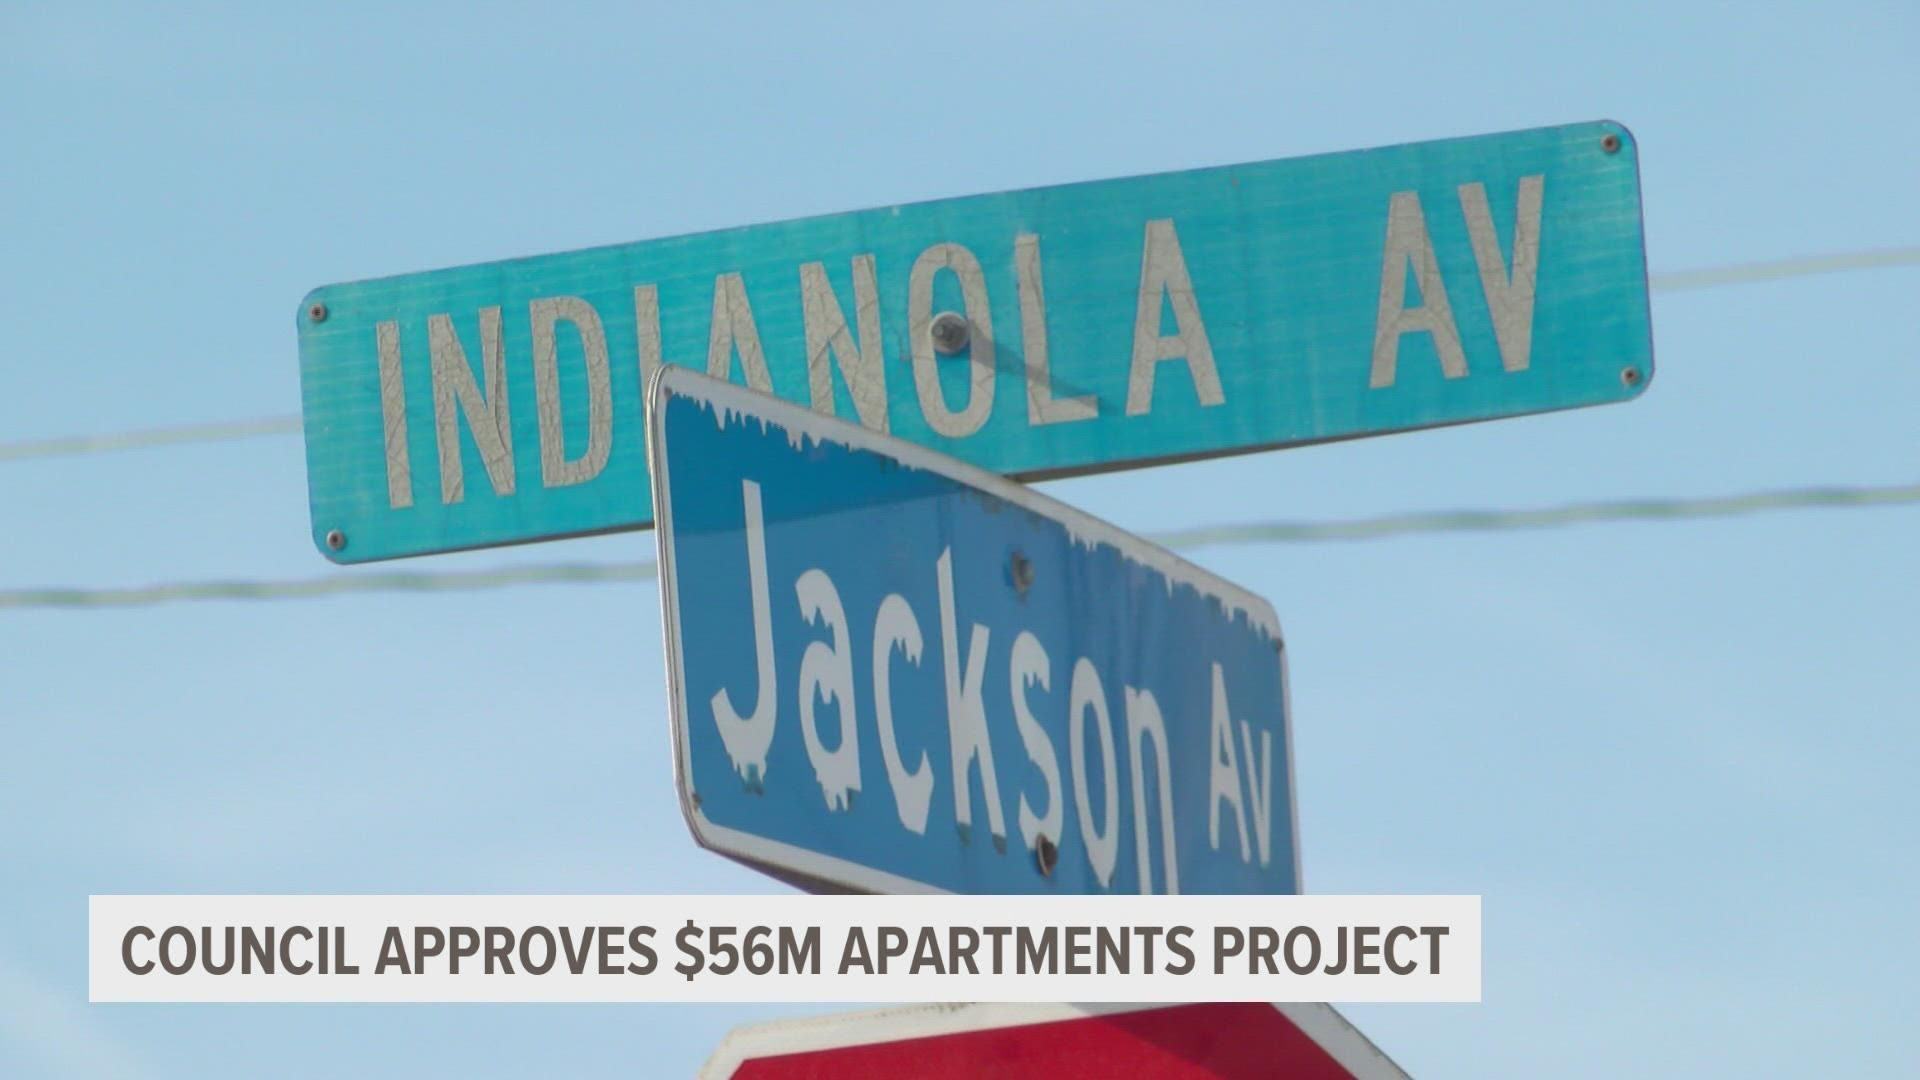 The affordable housing units would be located at 1600 Indianola Ave.